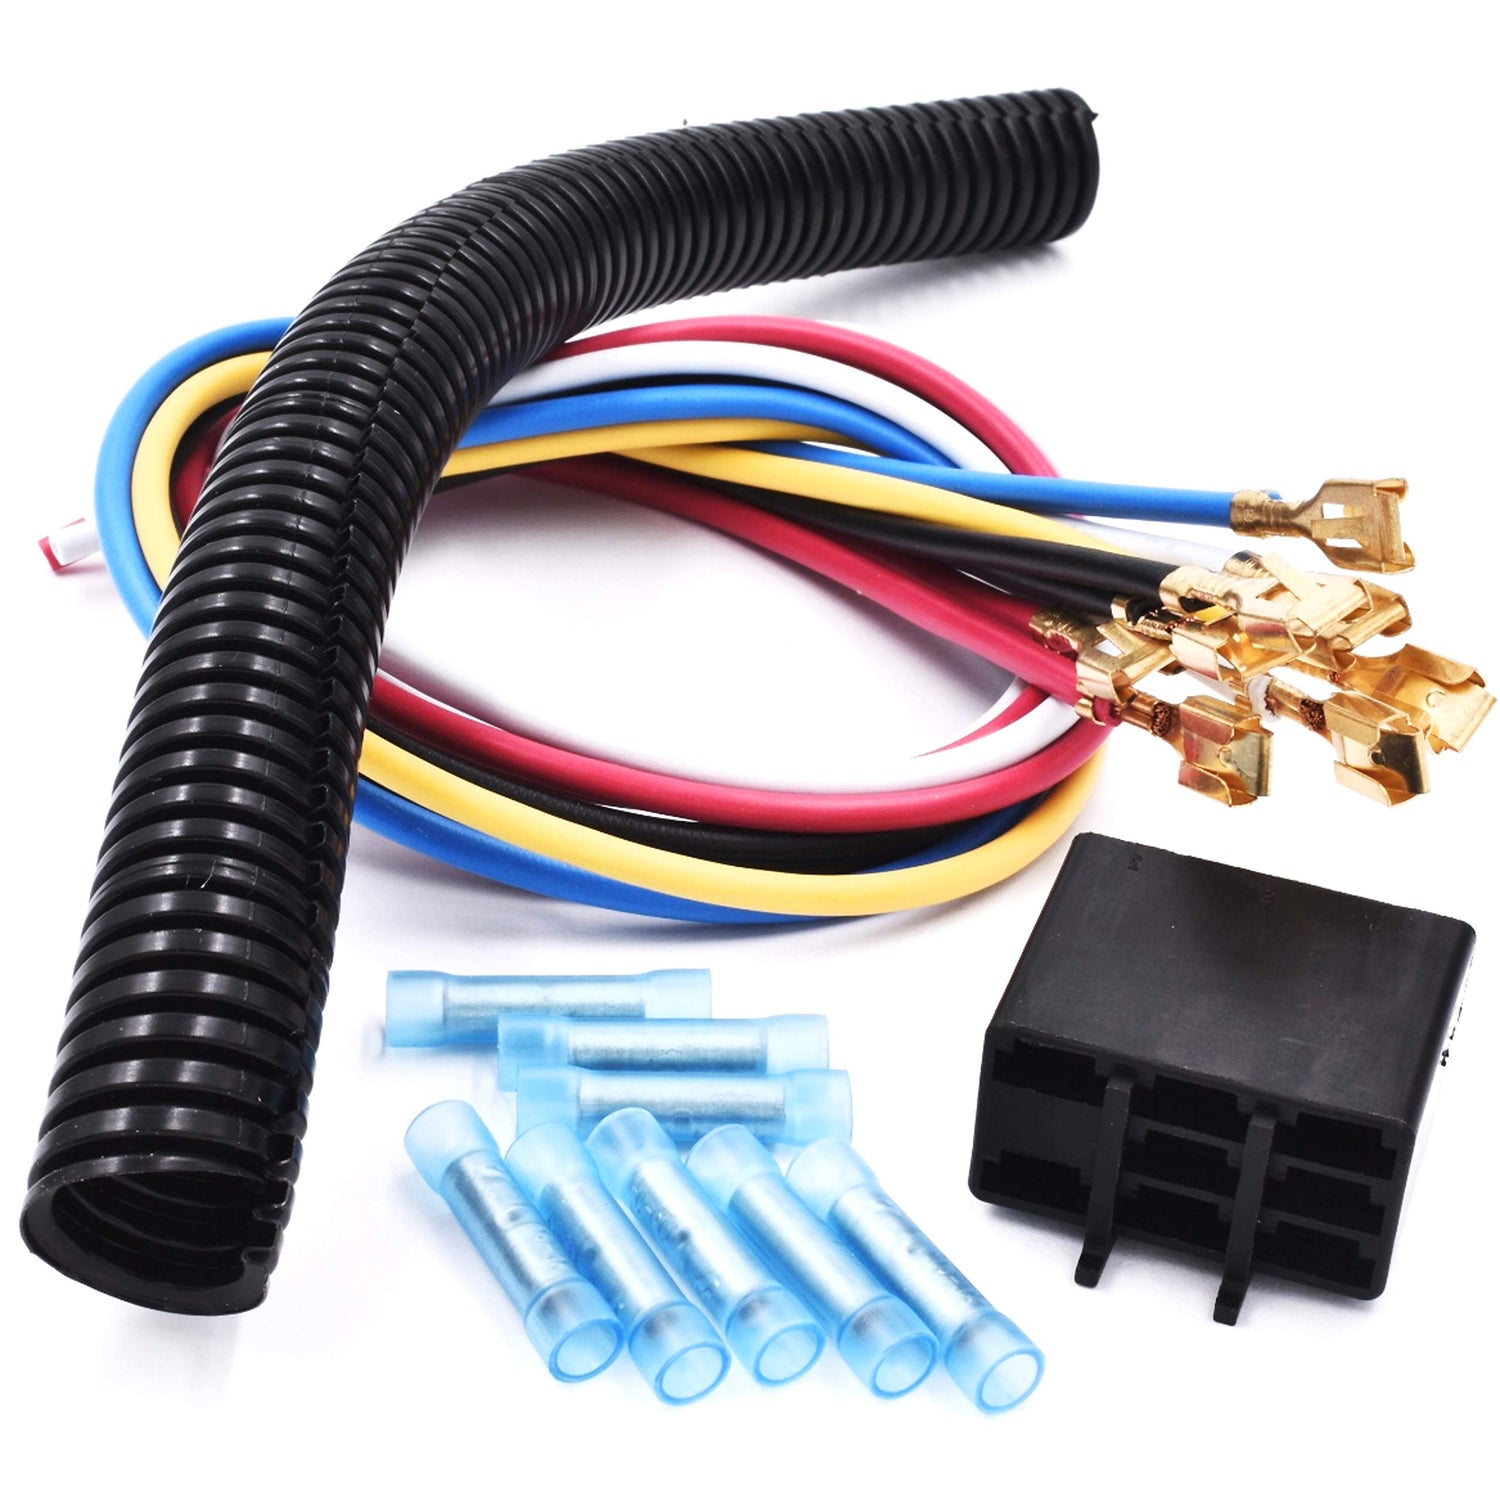 Electrical Components & Connections